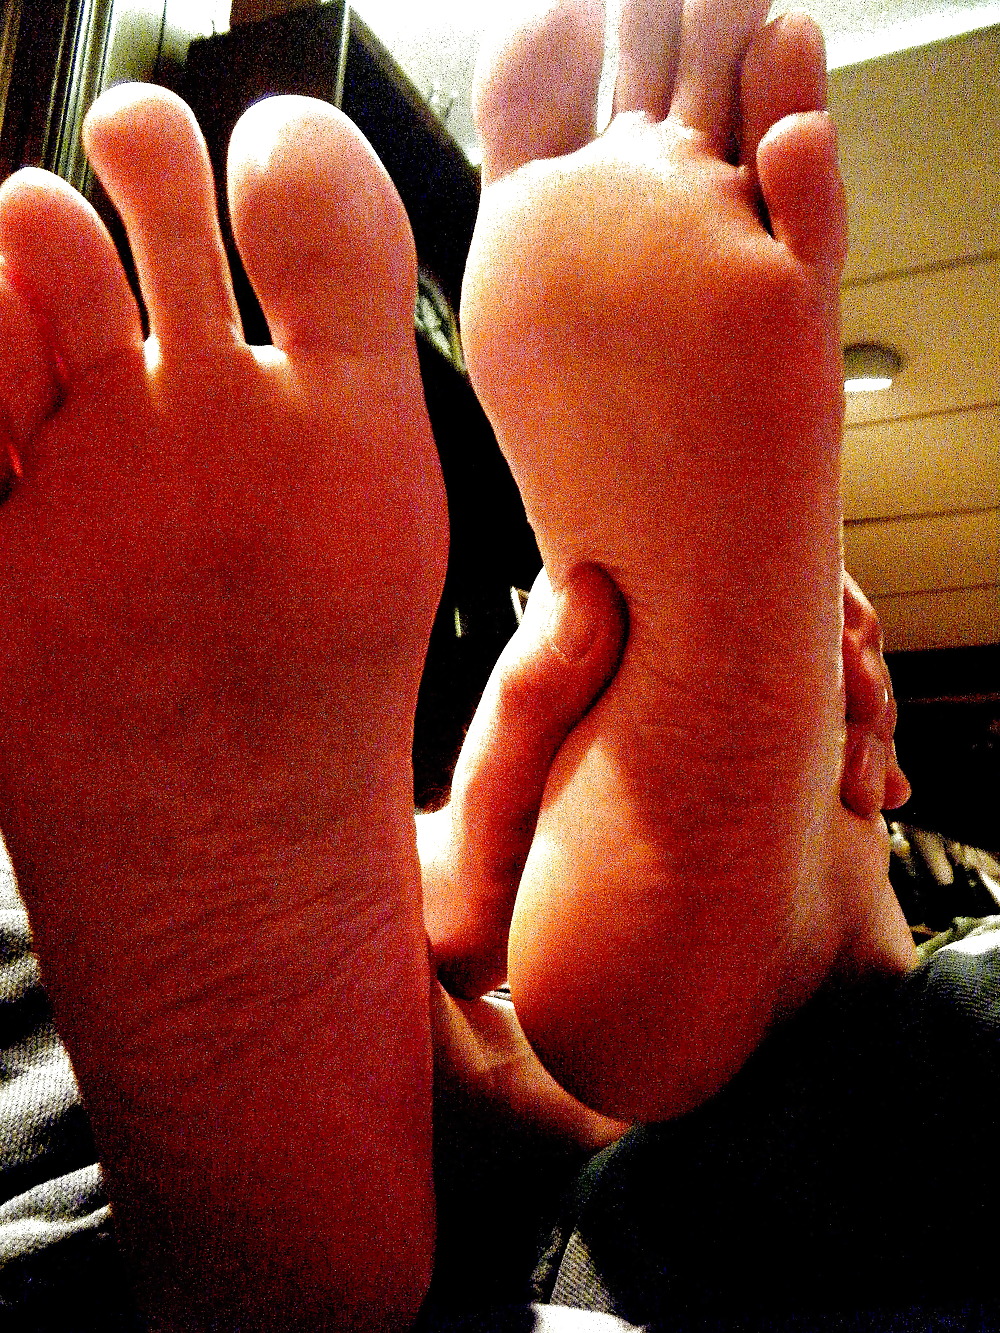 More candid shots of my wife's exquisite feet and toes porn gallery